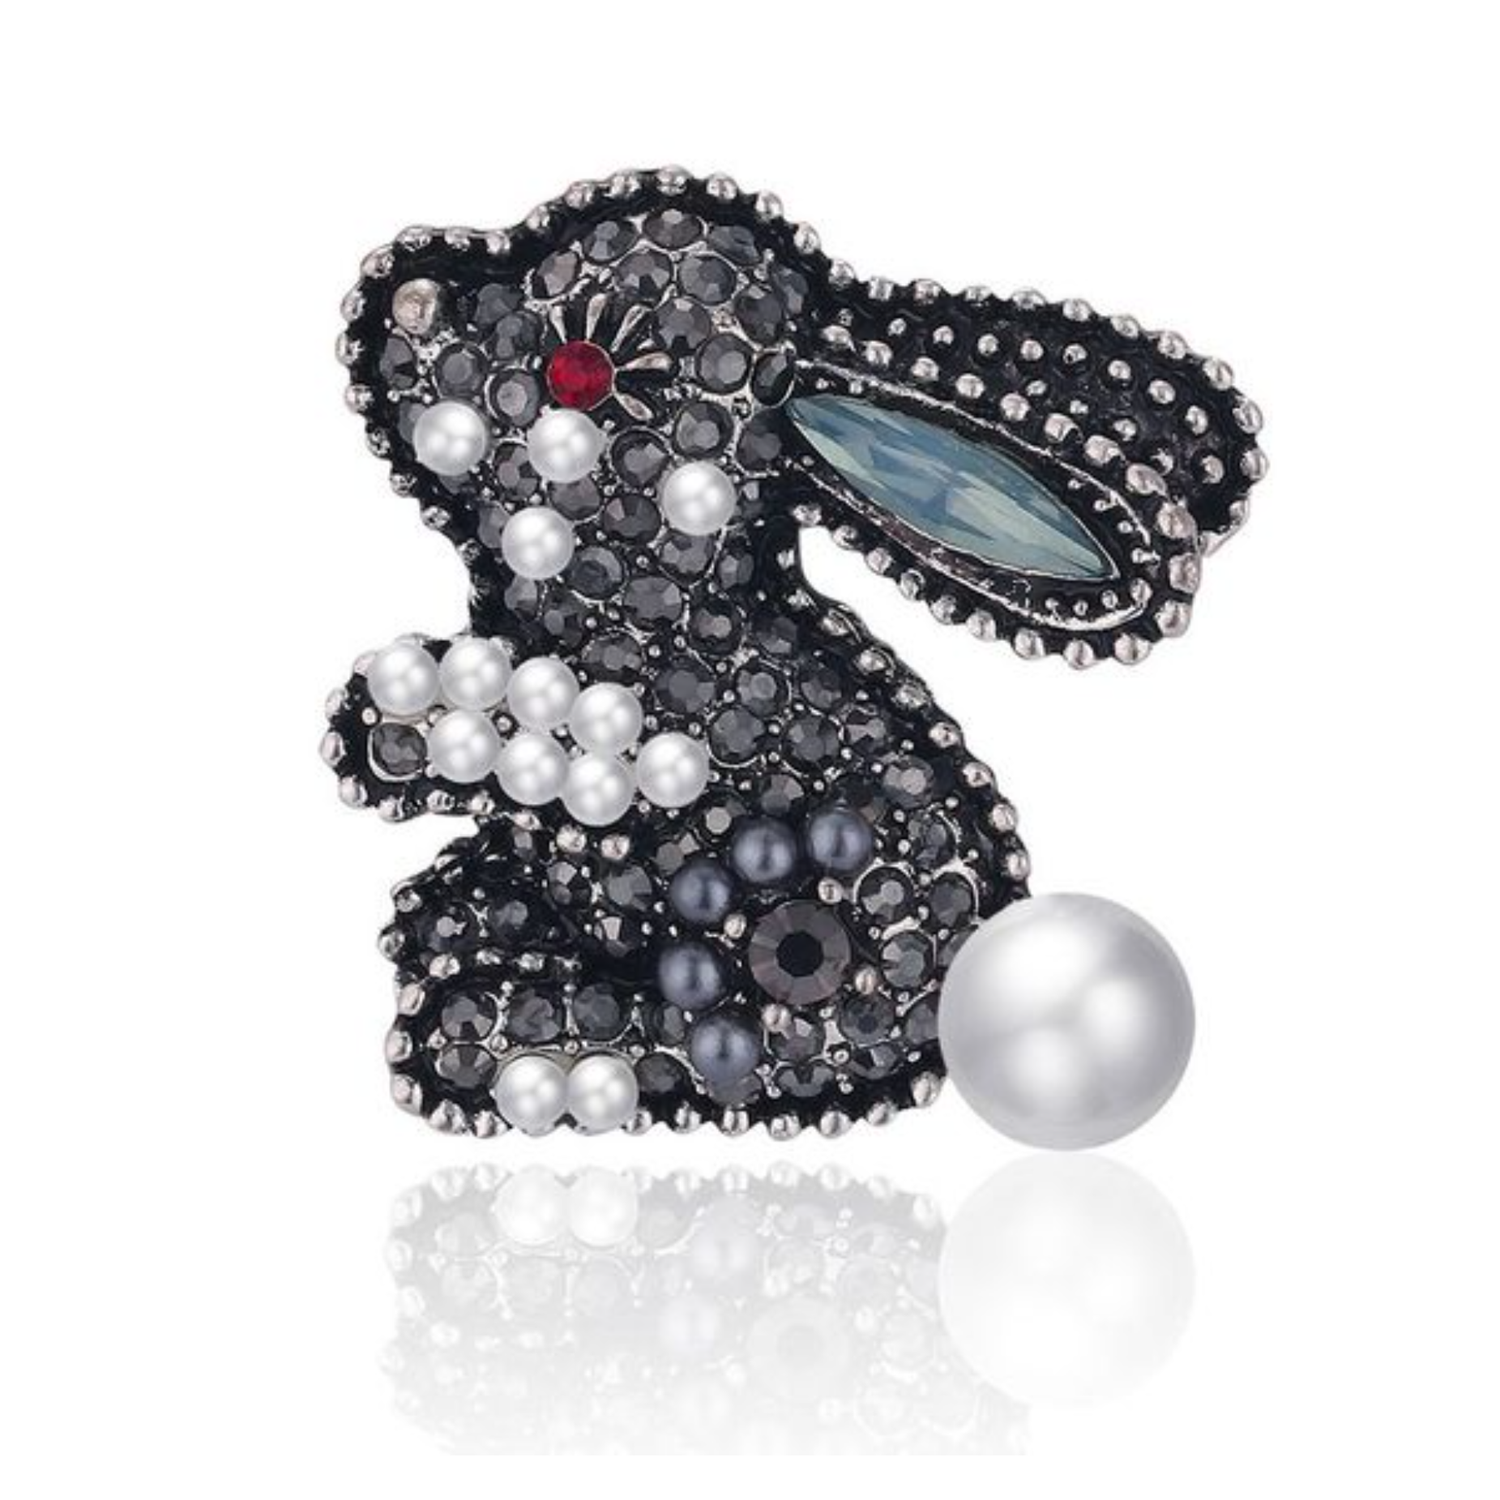 Black Bunny with Blue Ears Lapel Pin